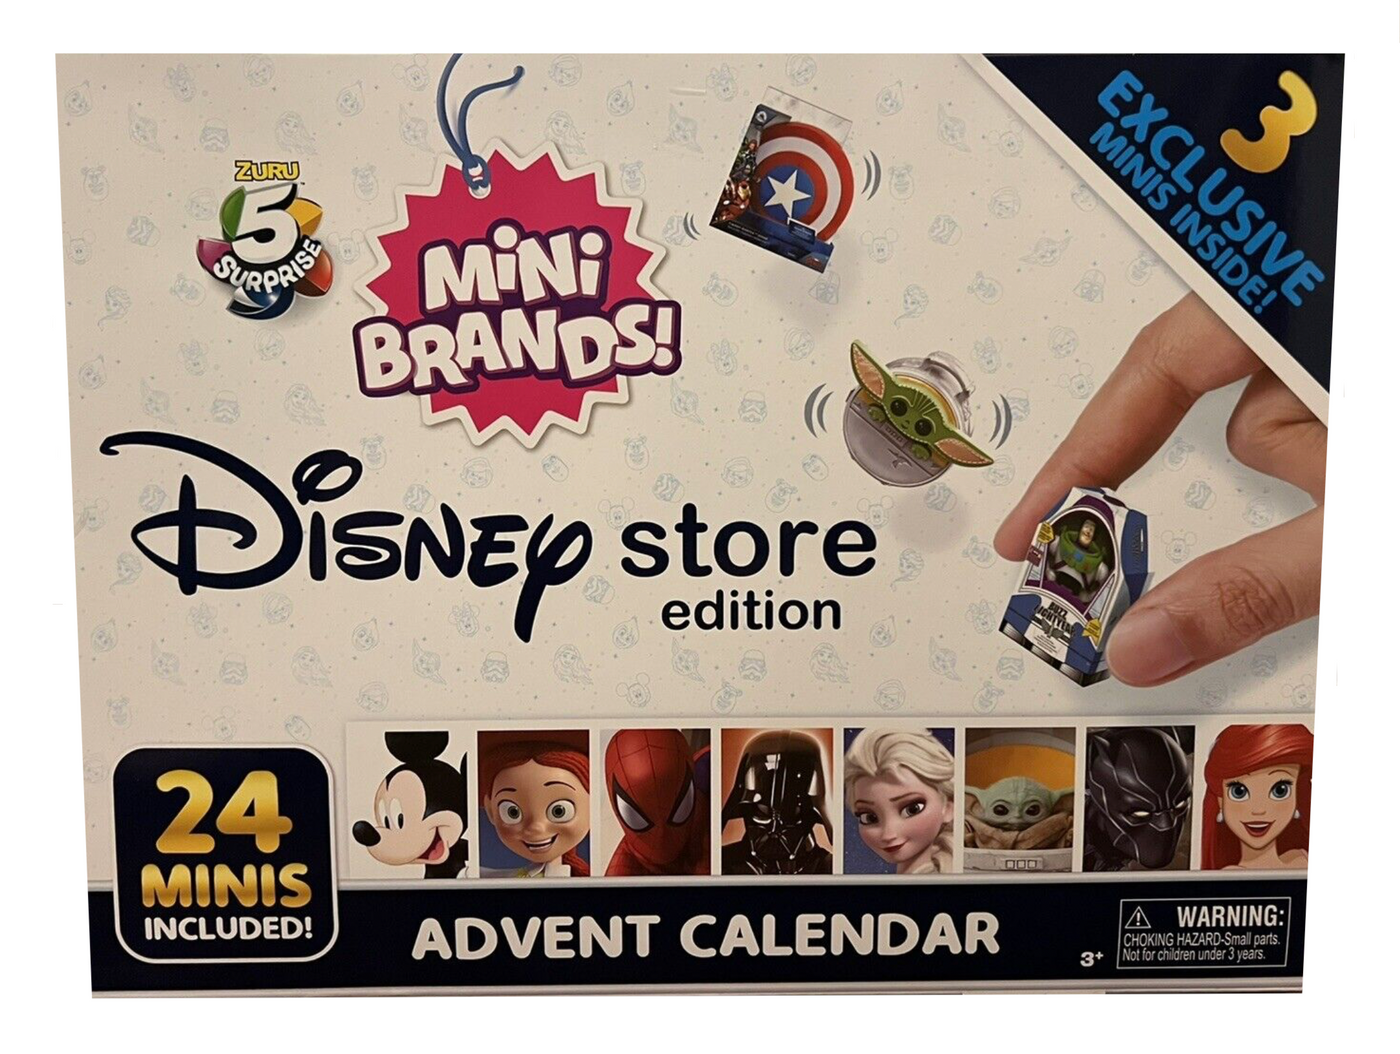 What Minis are Inside the Toy Mini Brands Advent Calendar? 